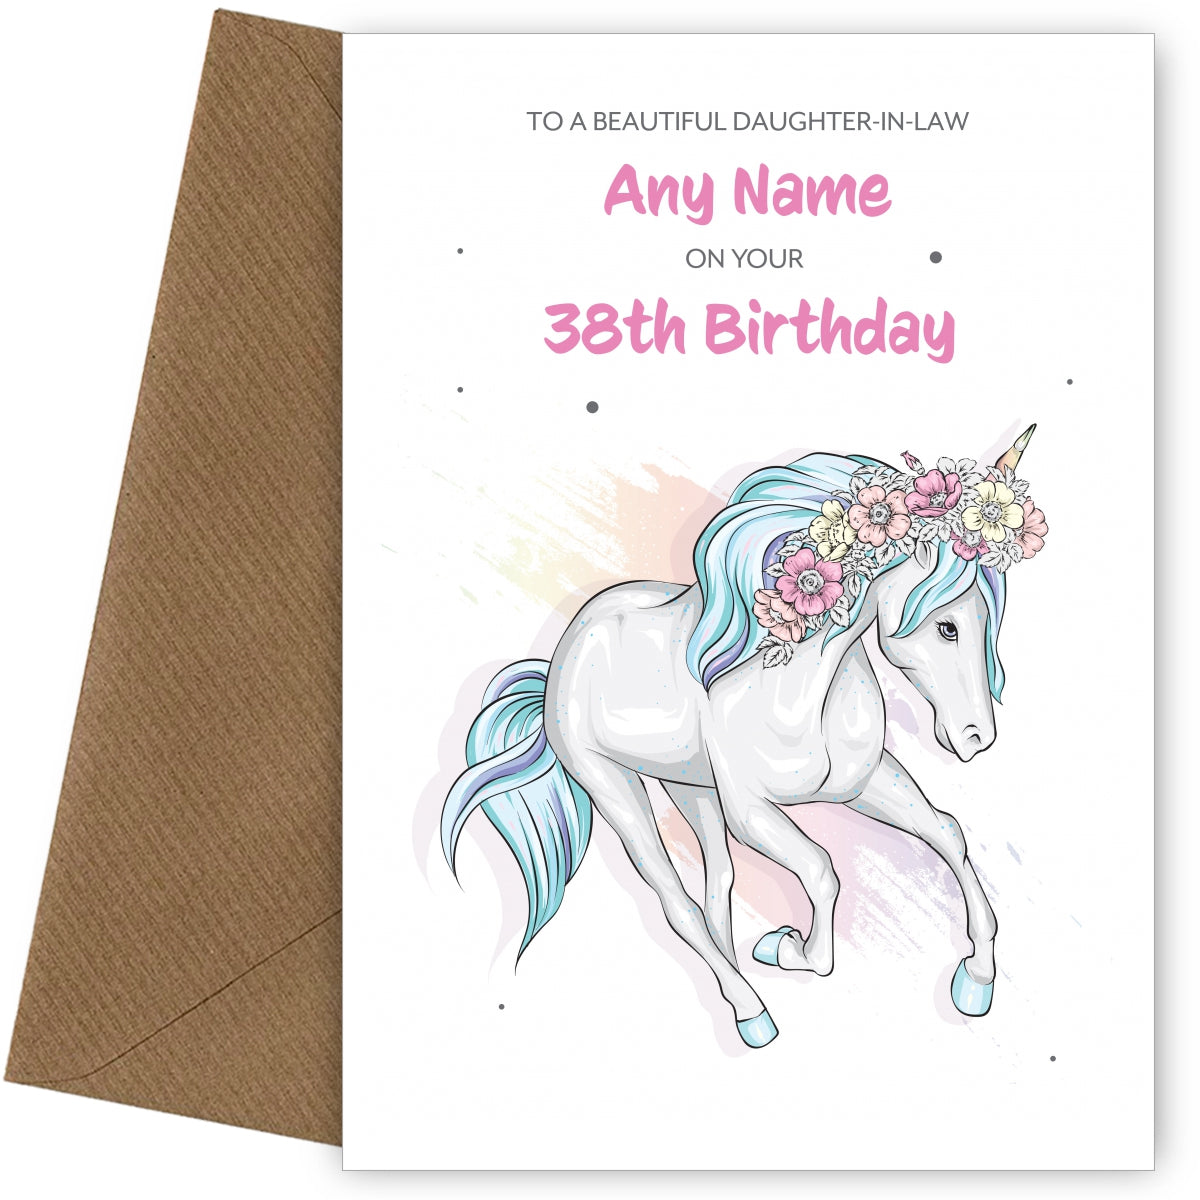 38th Birthday Card for Daughter-in-law - Beautiful Unicorn